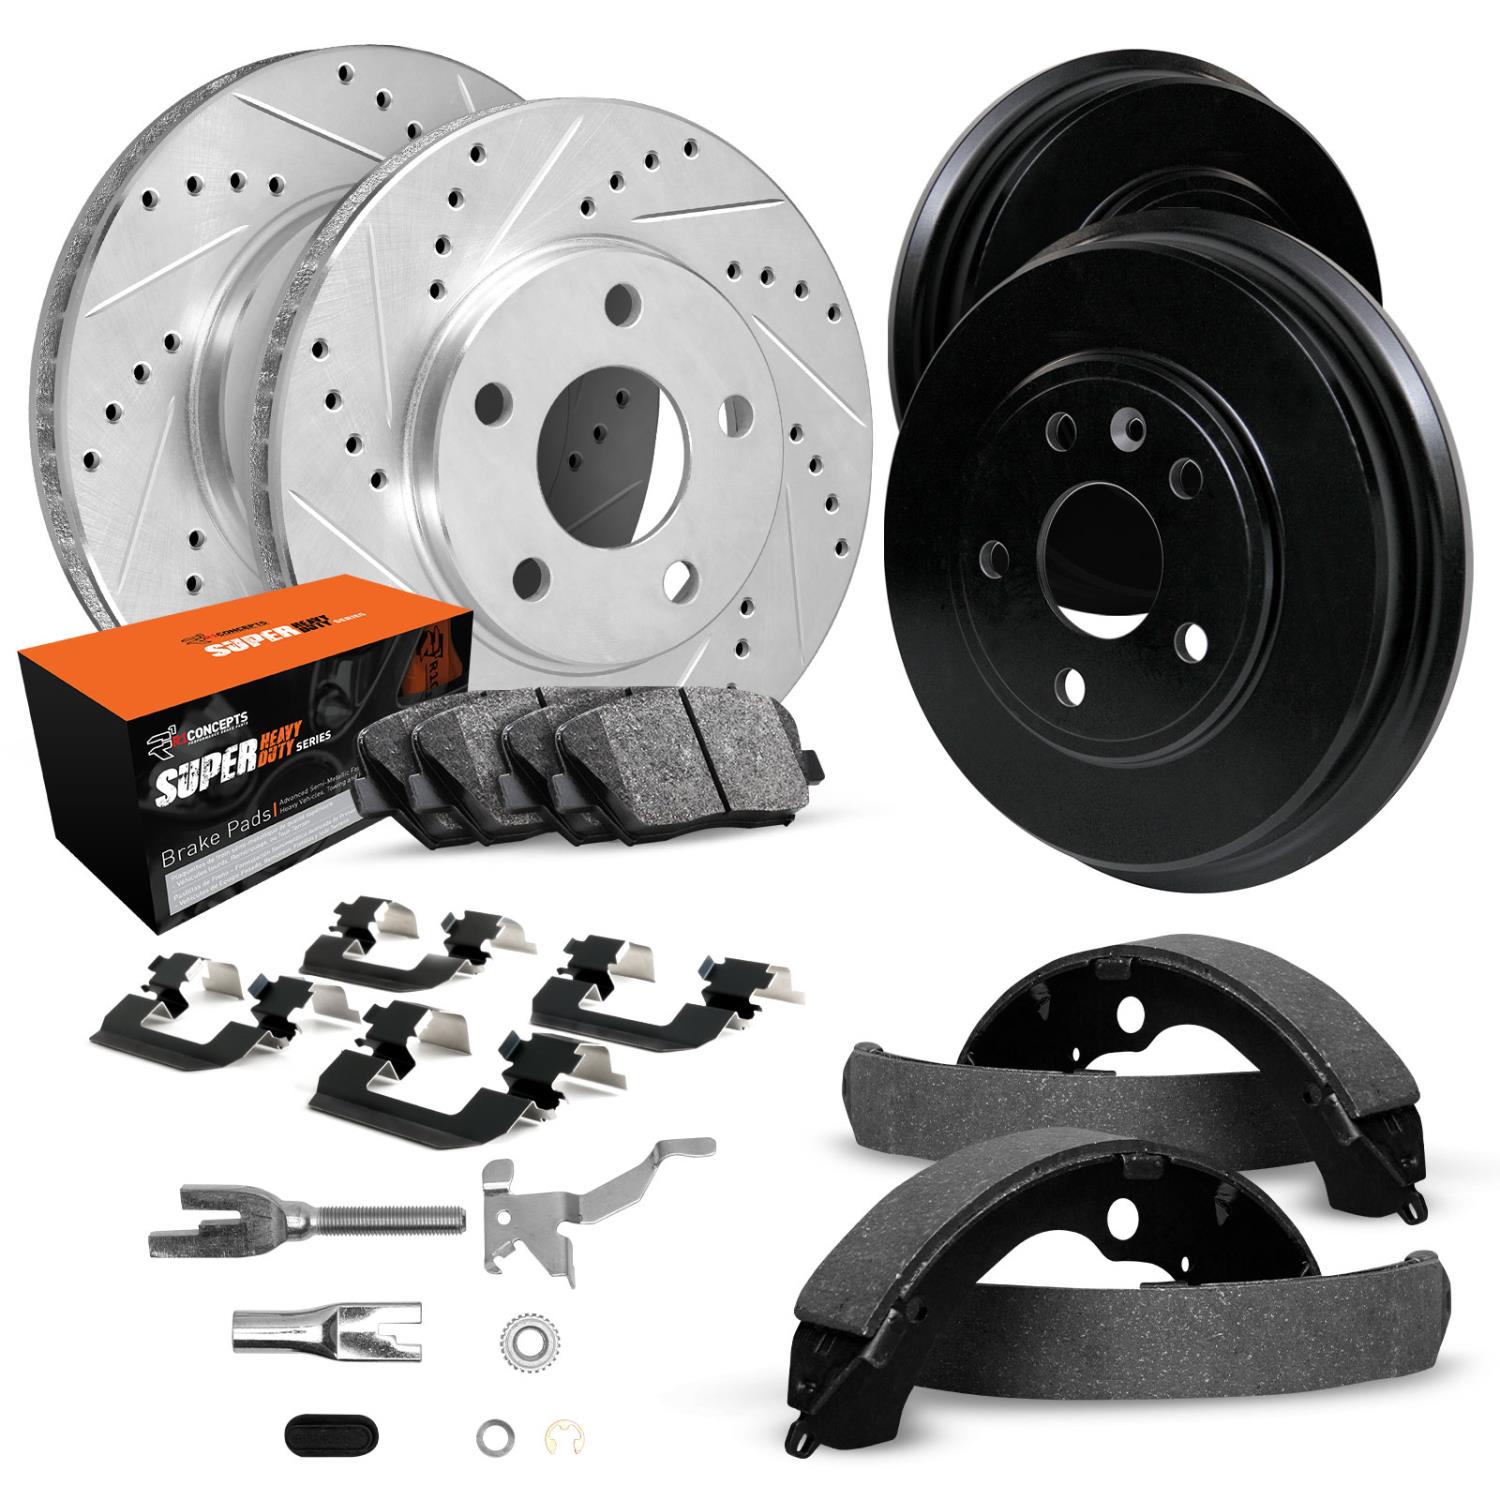 E-Line Drilled/Slotted Silver Rotor & Drum Set w/Super-Duty Pads, Shoes/Hardware/Adjusters, 1975-1976 Ford/Lincoln/Mercury/Mazda